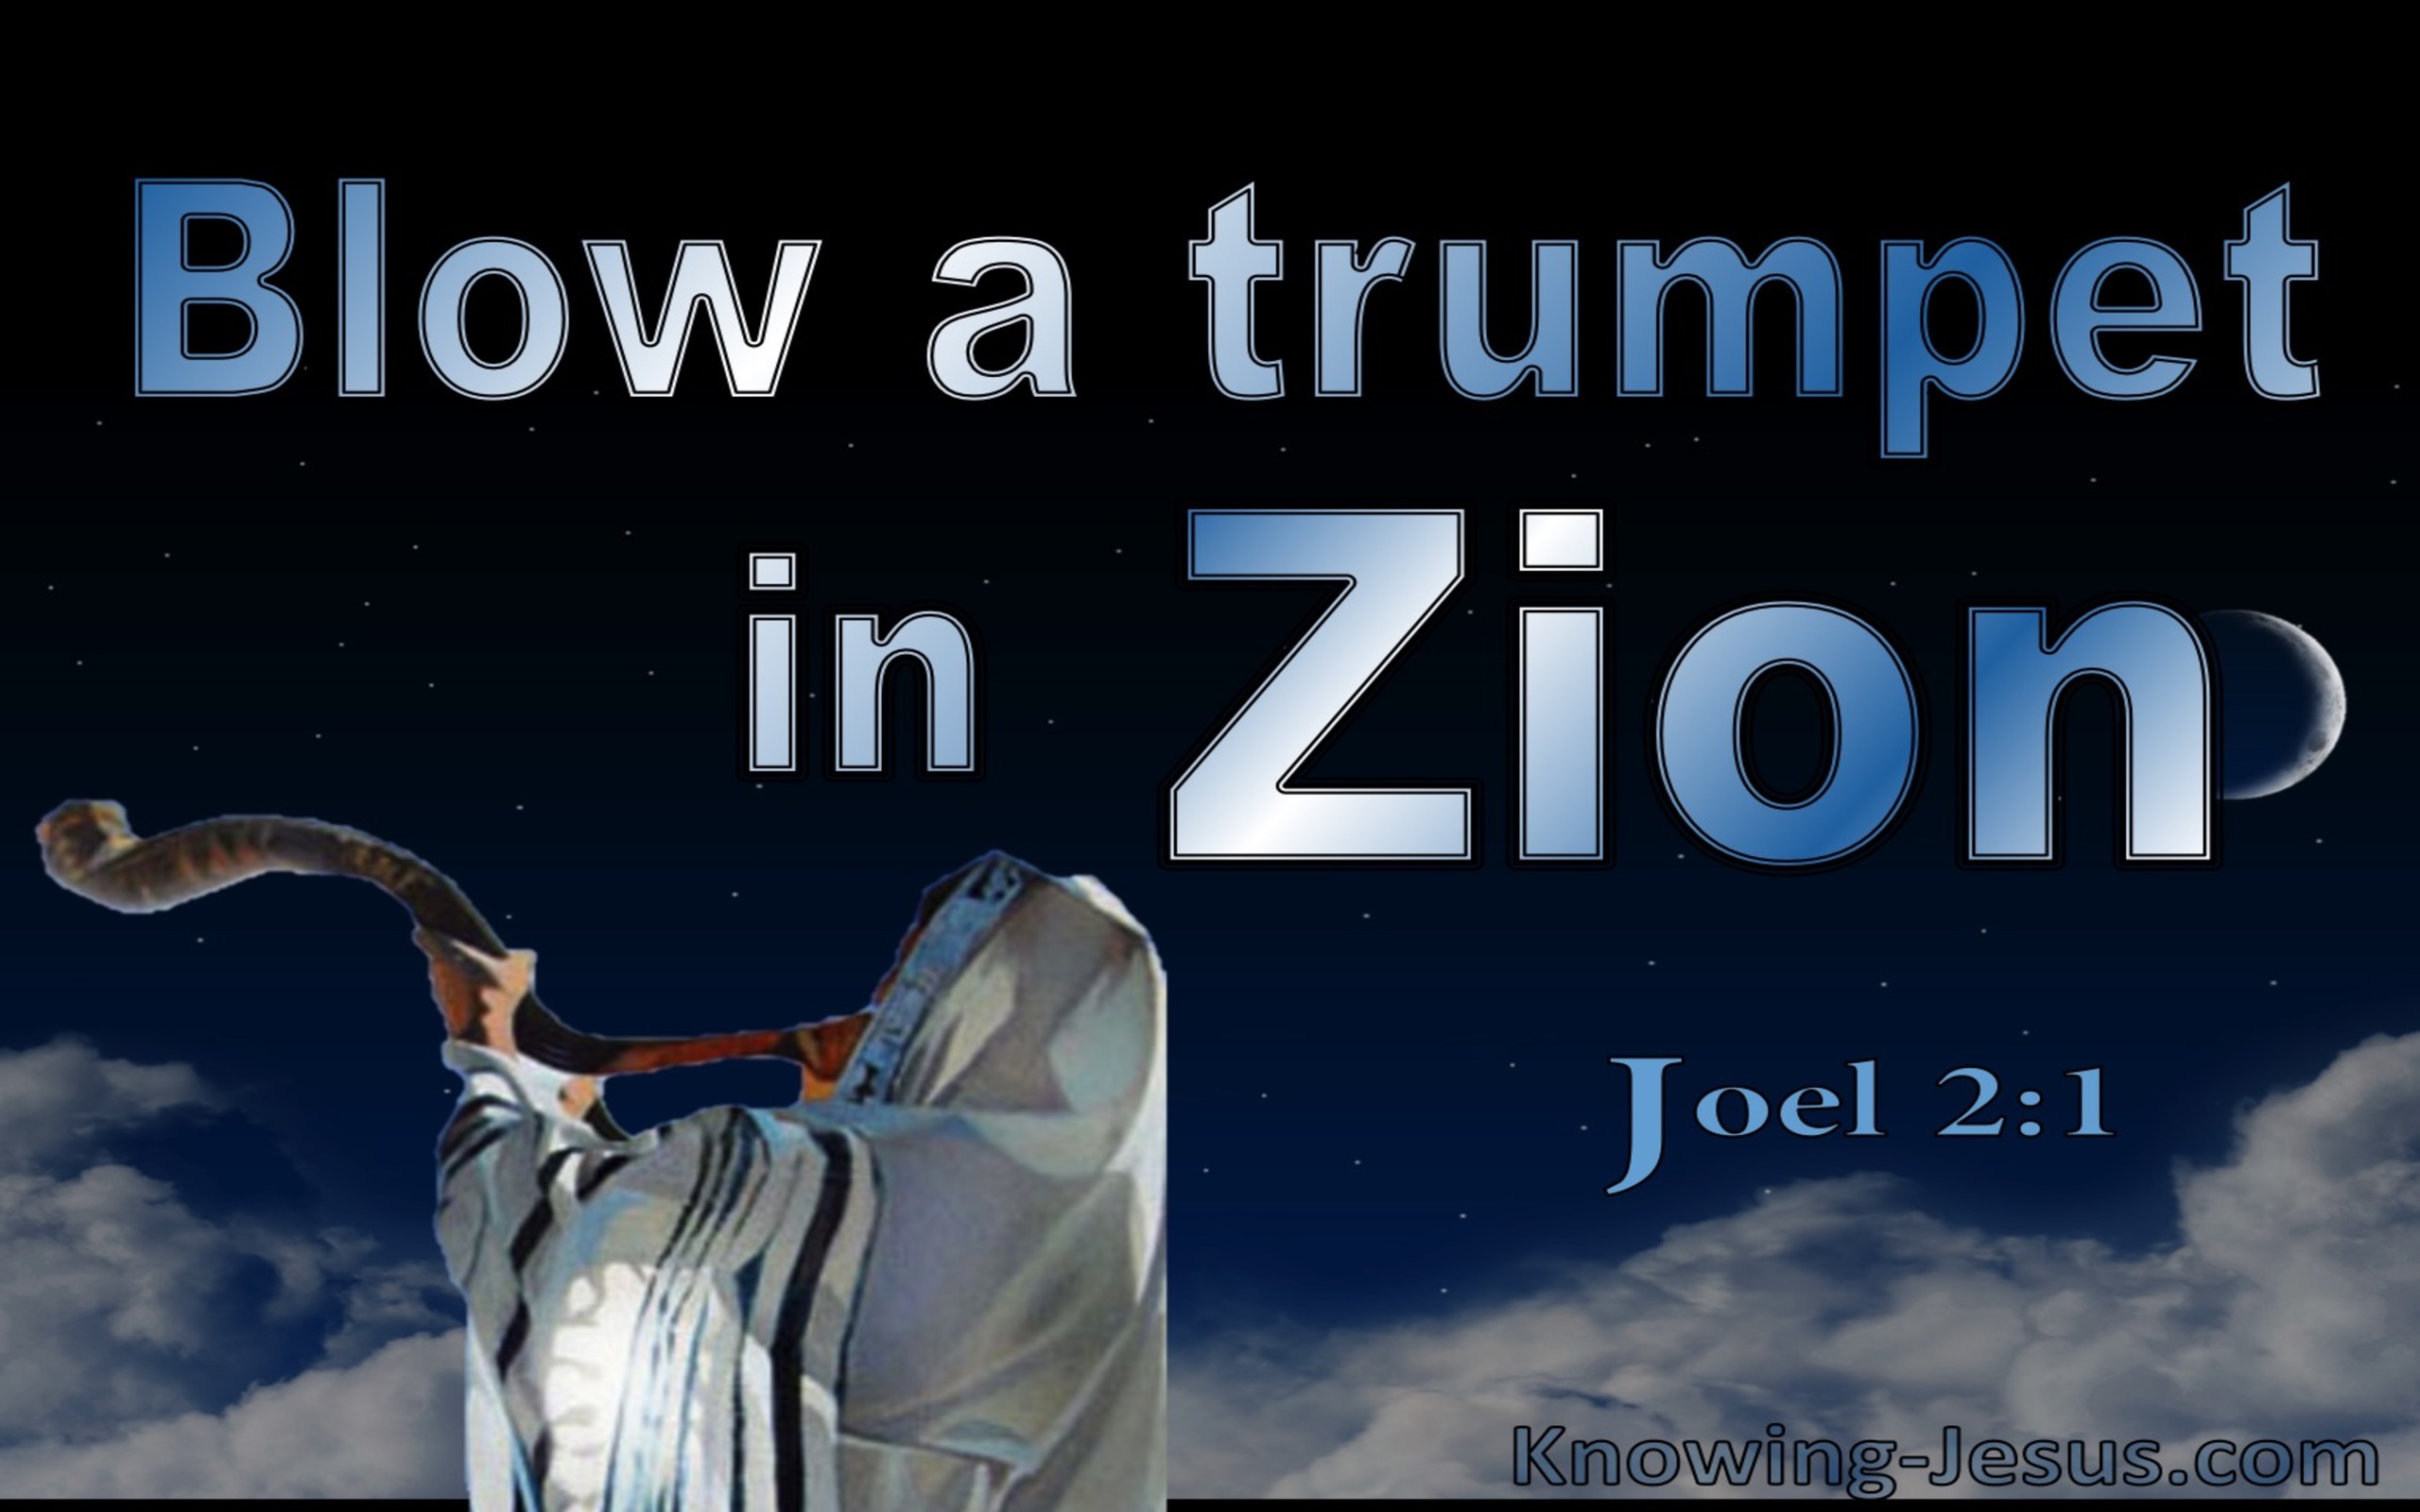 Joel 2:1 BLow A Trumpet For The Day Of The Lord (blue)